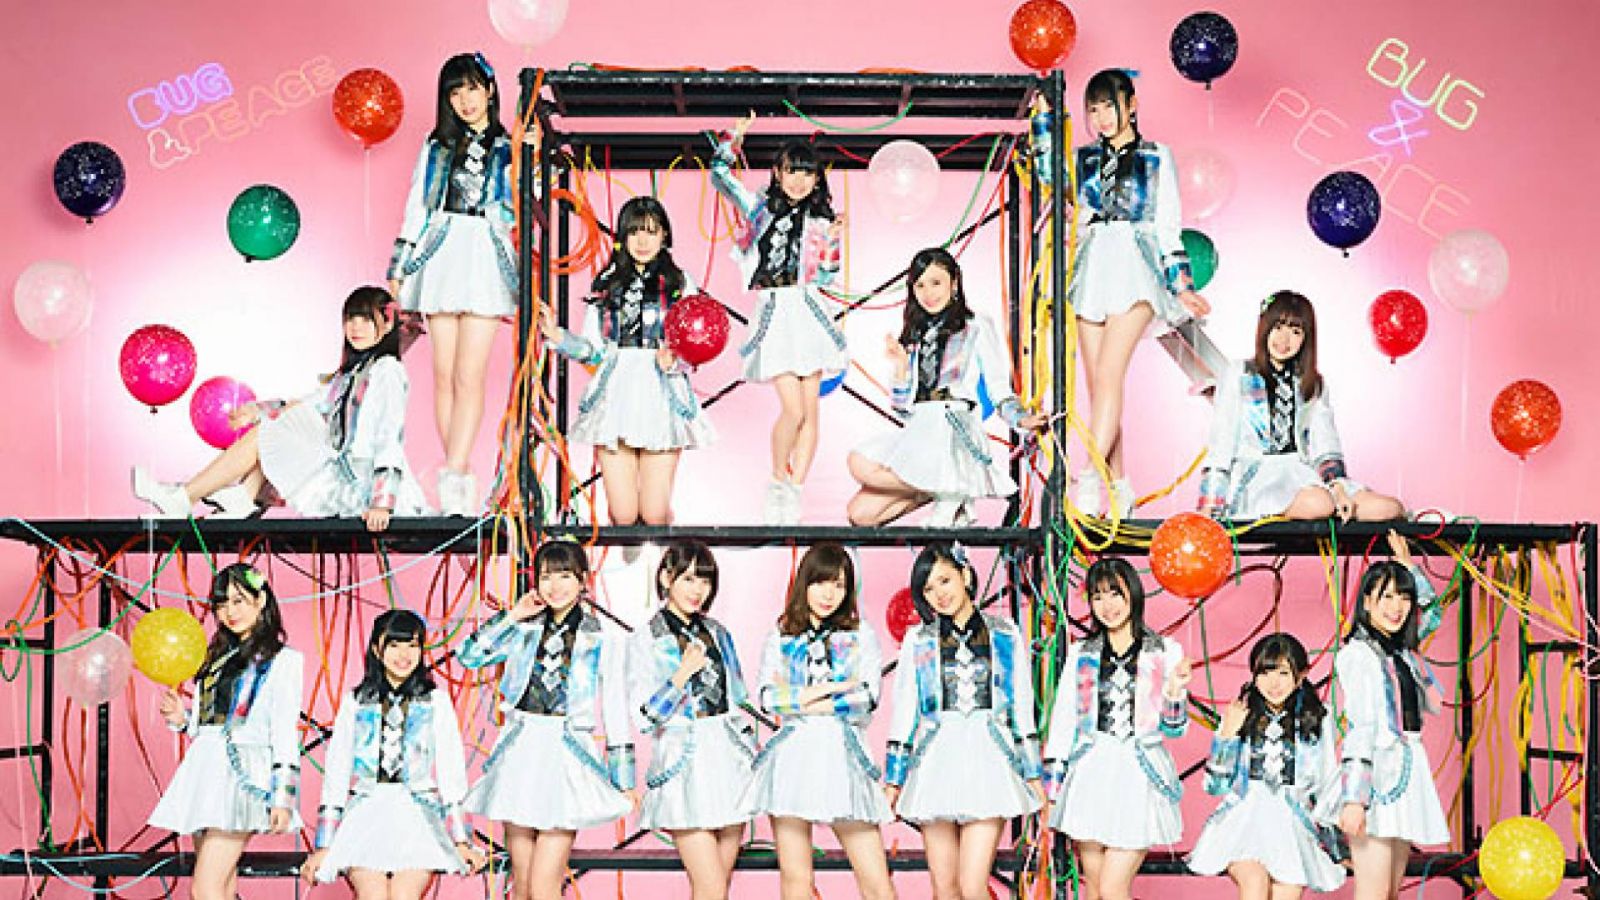 Fuchigami Mai pausiert bei HKT48 © UNIVERSAL MUSIC JAPAN / EMI RECORDS all rights reserved